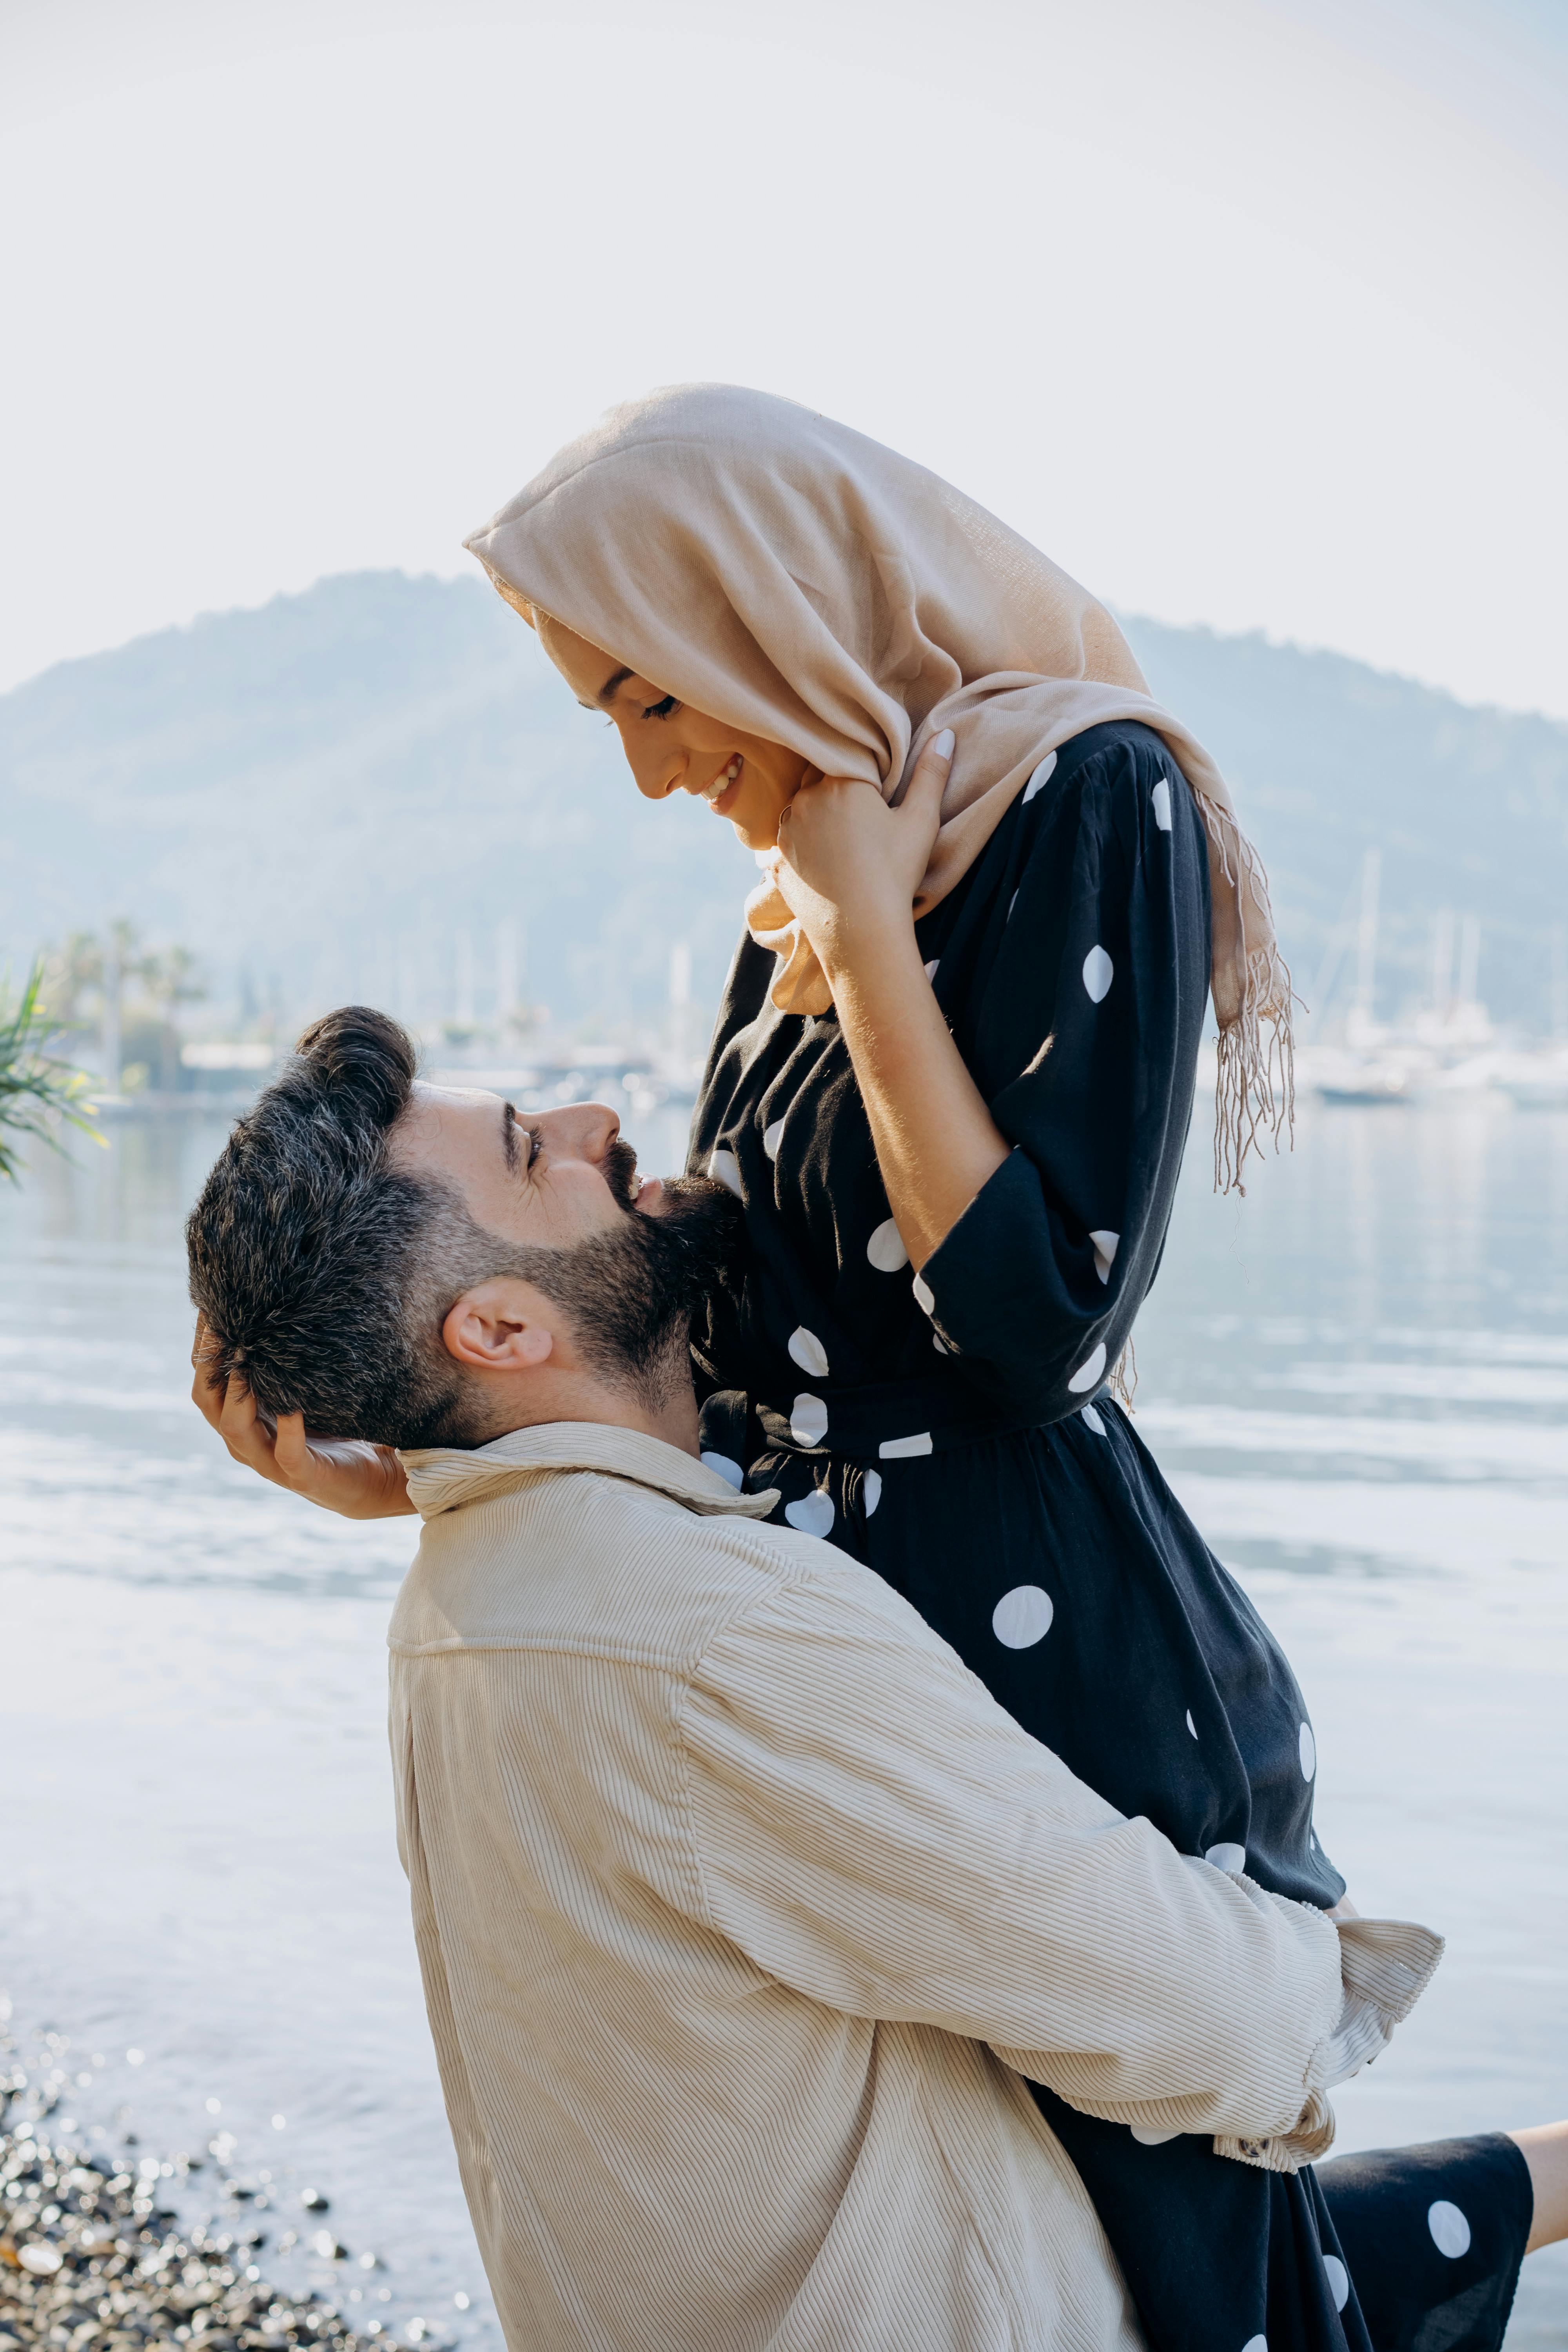 Muslim Couple Photos, Download The BEST Free Muslim Couple Stock Photos &  HD Images